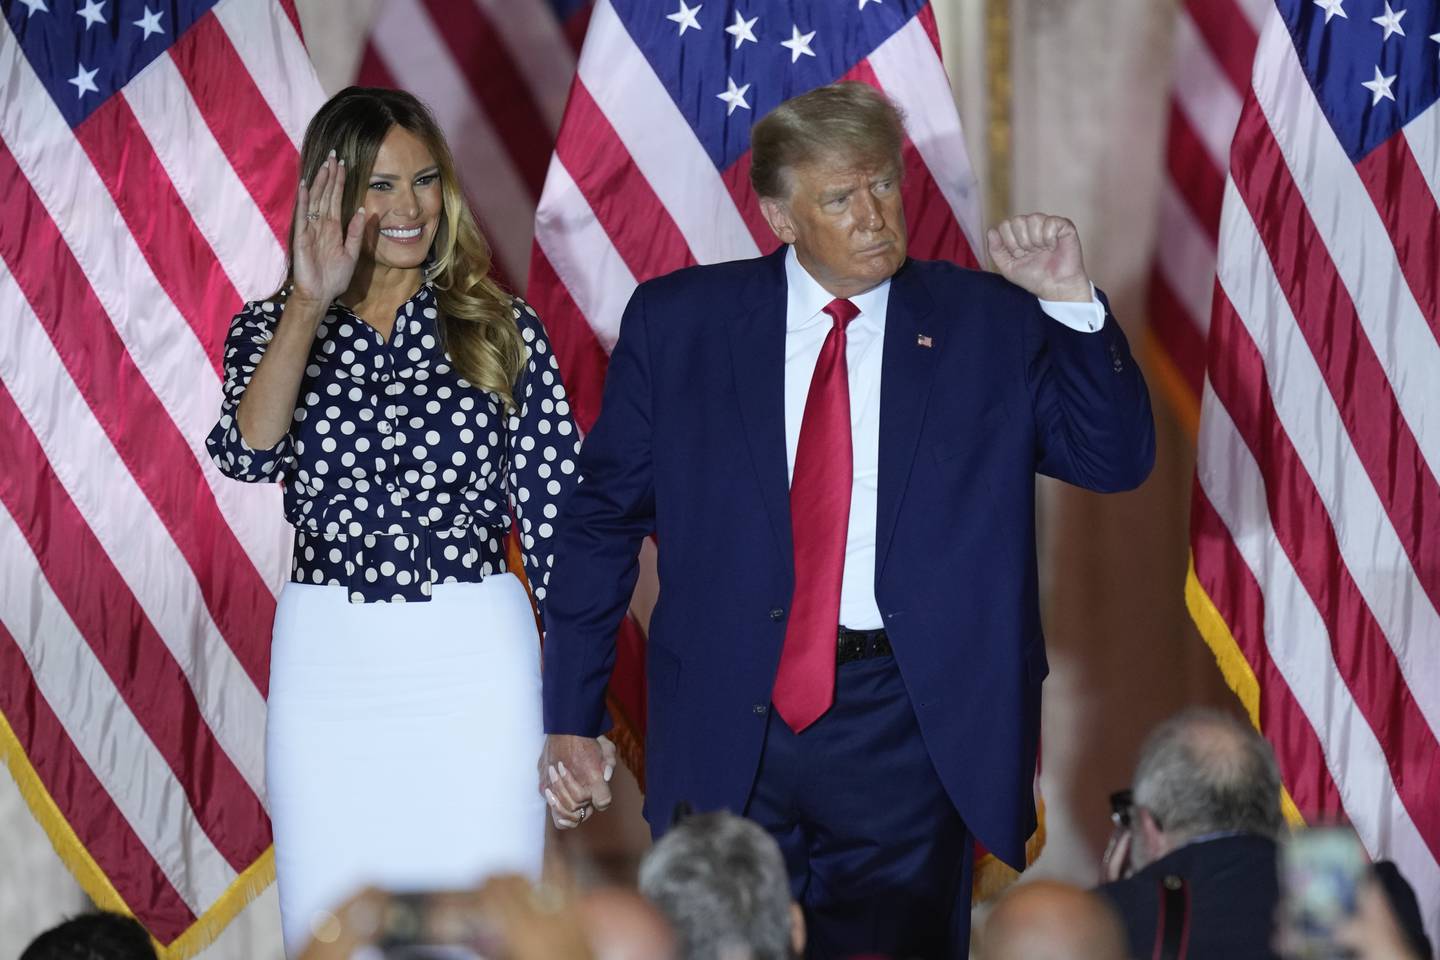 Former President Donald Trump stands on stage with former first lady Melania Trump after announcing a third run for president at Mar-a-Lago in Palm Beach, Fla., Tuesday, Nov. 15, 2022. (AP Photo/Rebecca Blackwell)